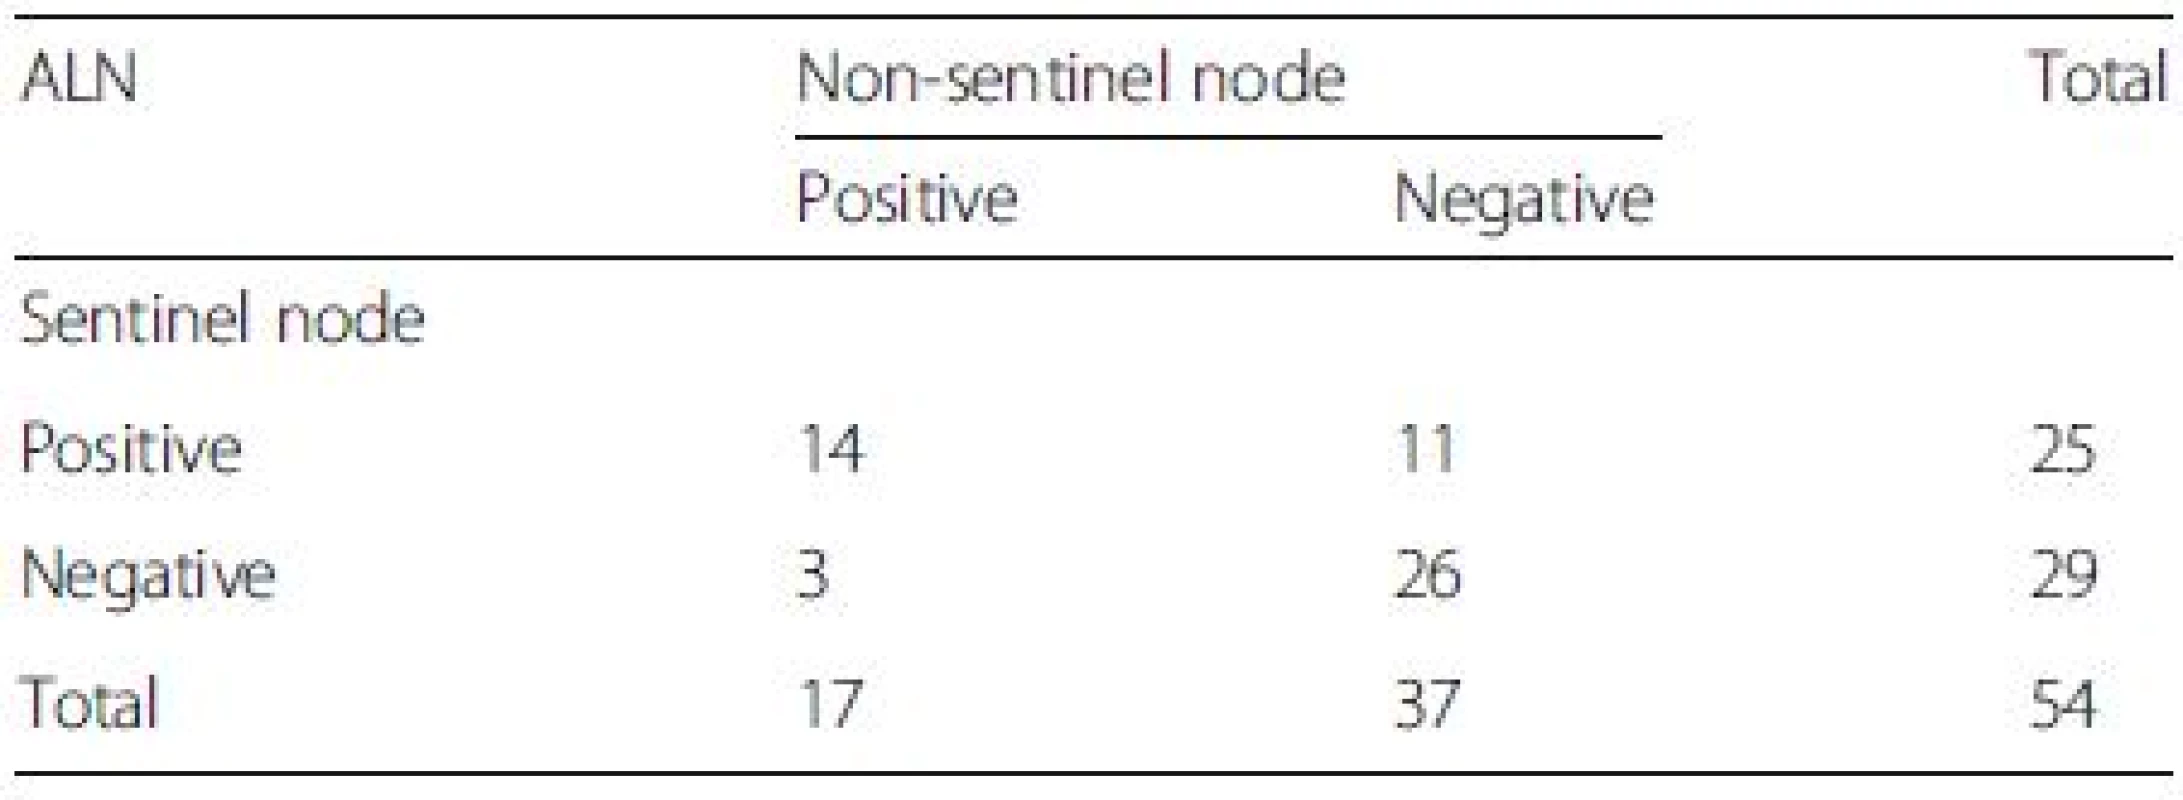 The status of axillary lymph node (ALN) after neoadjuvant chemotherapy in group B